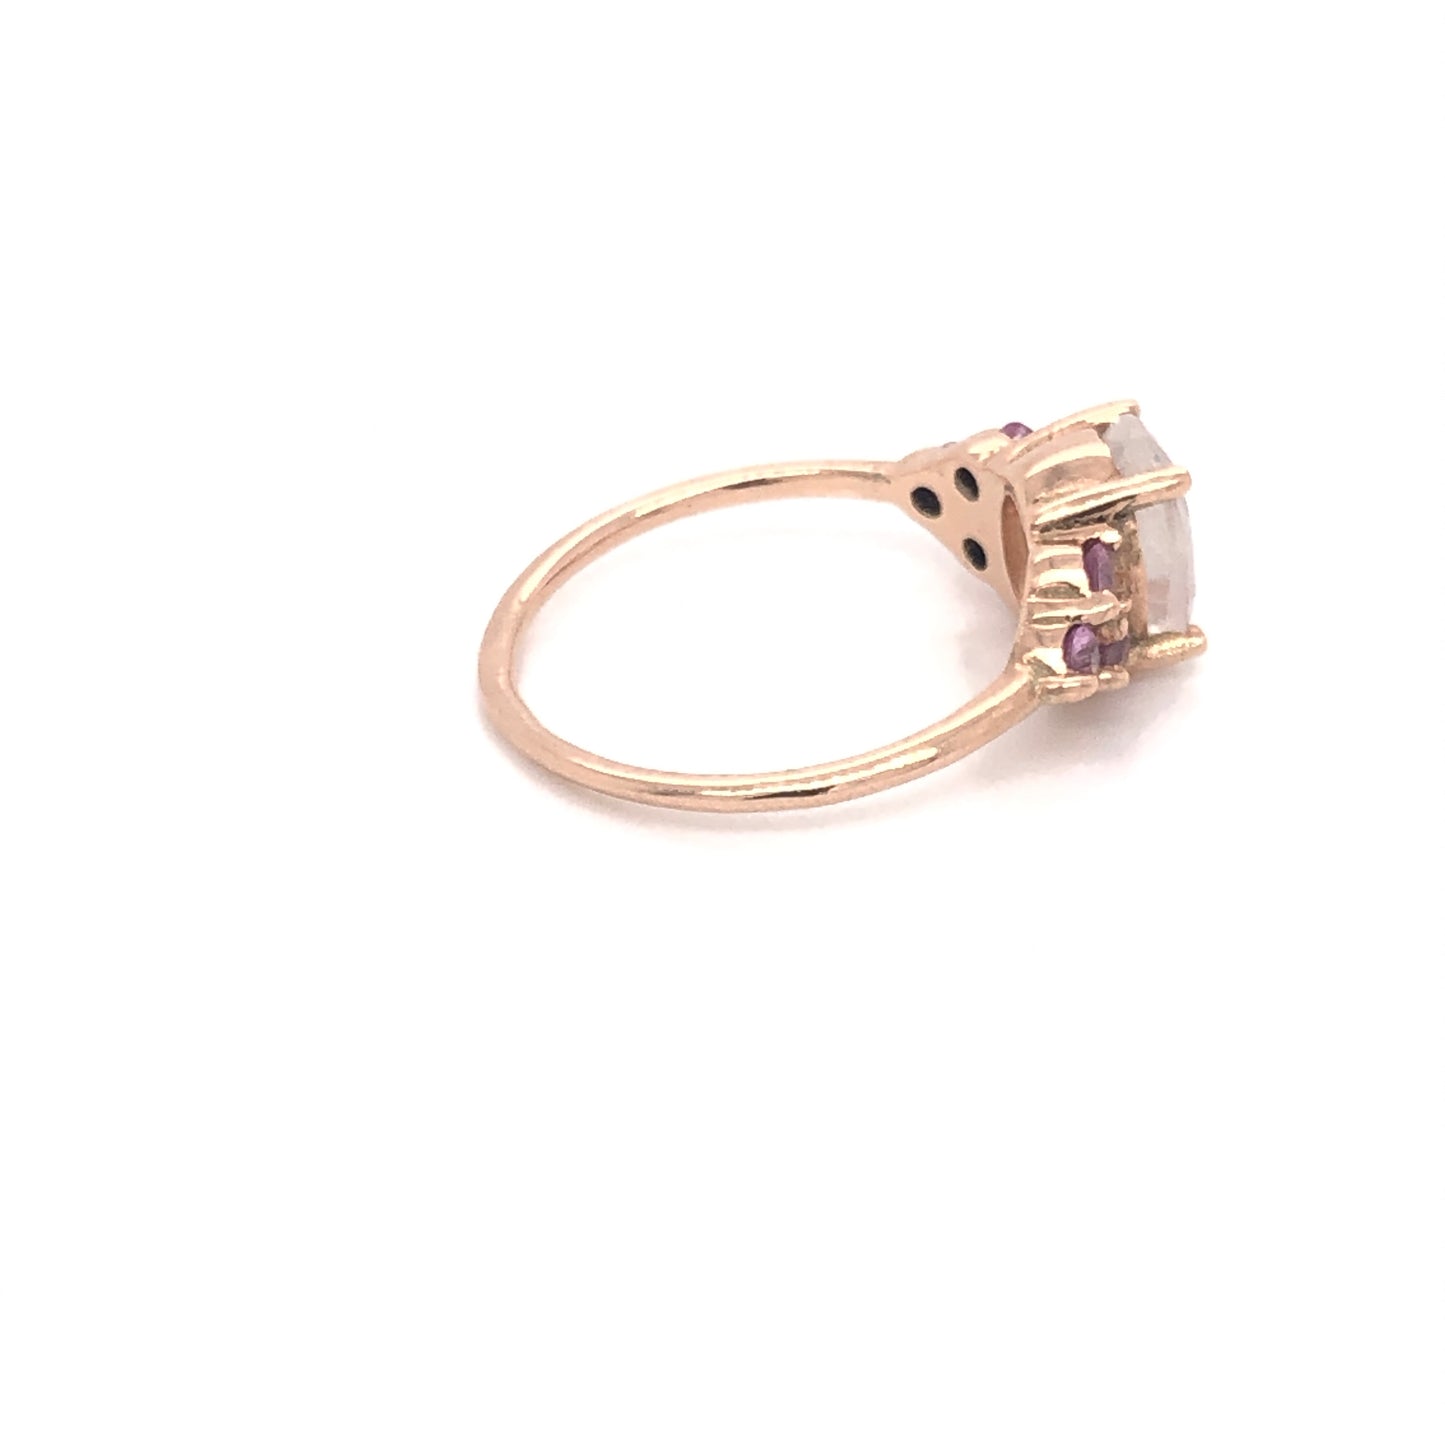 Valeria Ring with Pink Sapphires